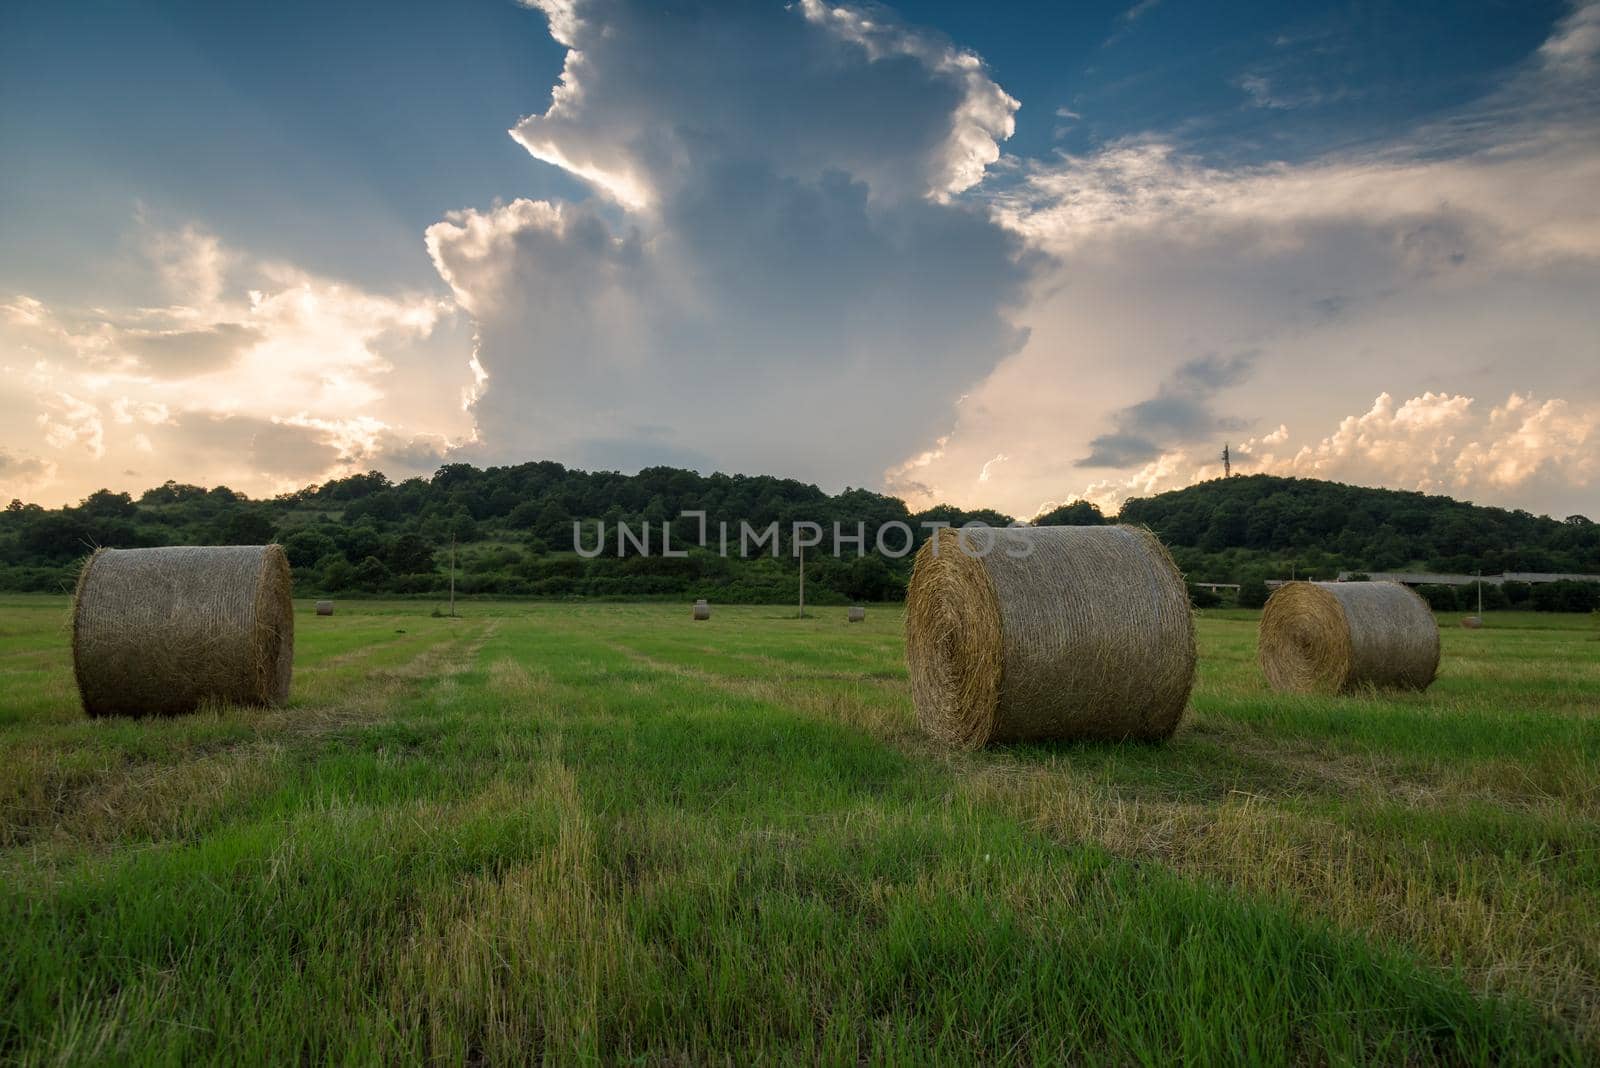 Field of freshly bales of hay with beautiful sunset